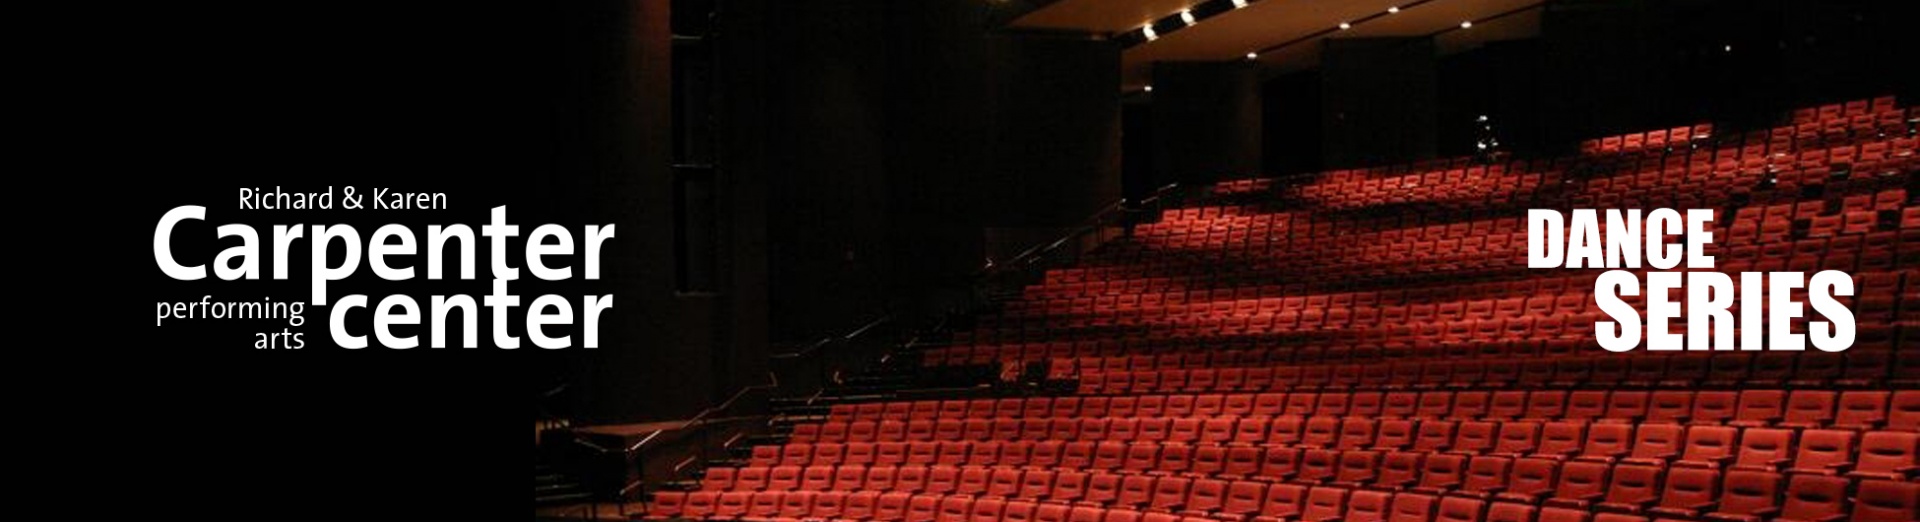 Carpenter Center logo and the words Dance Series on an Image of the interior of the Carpenter Center theatre